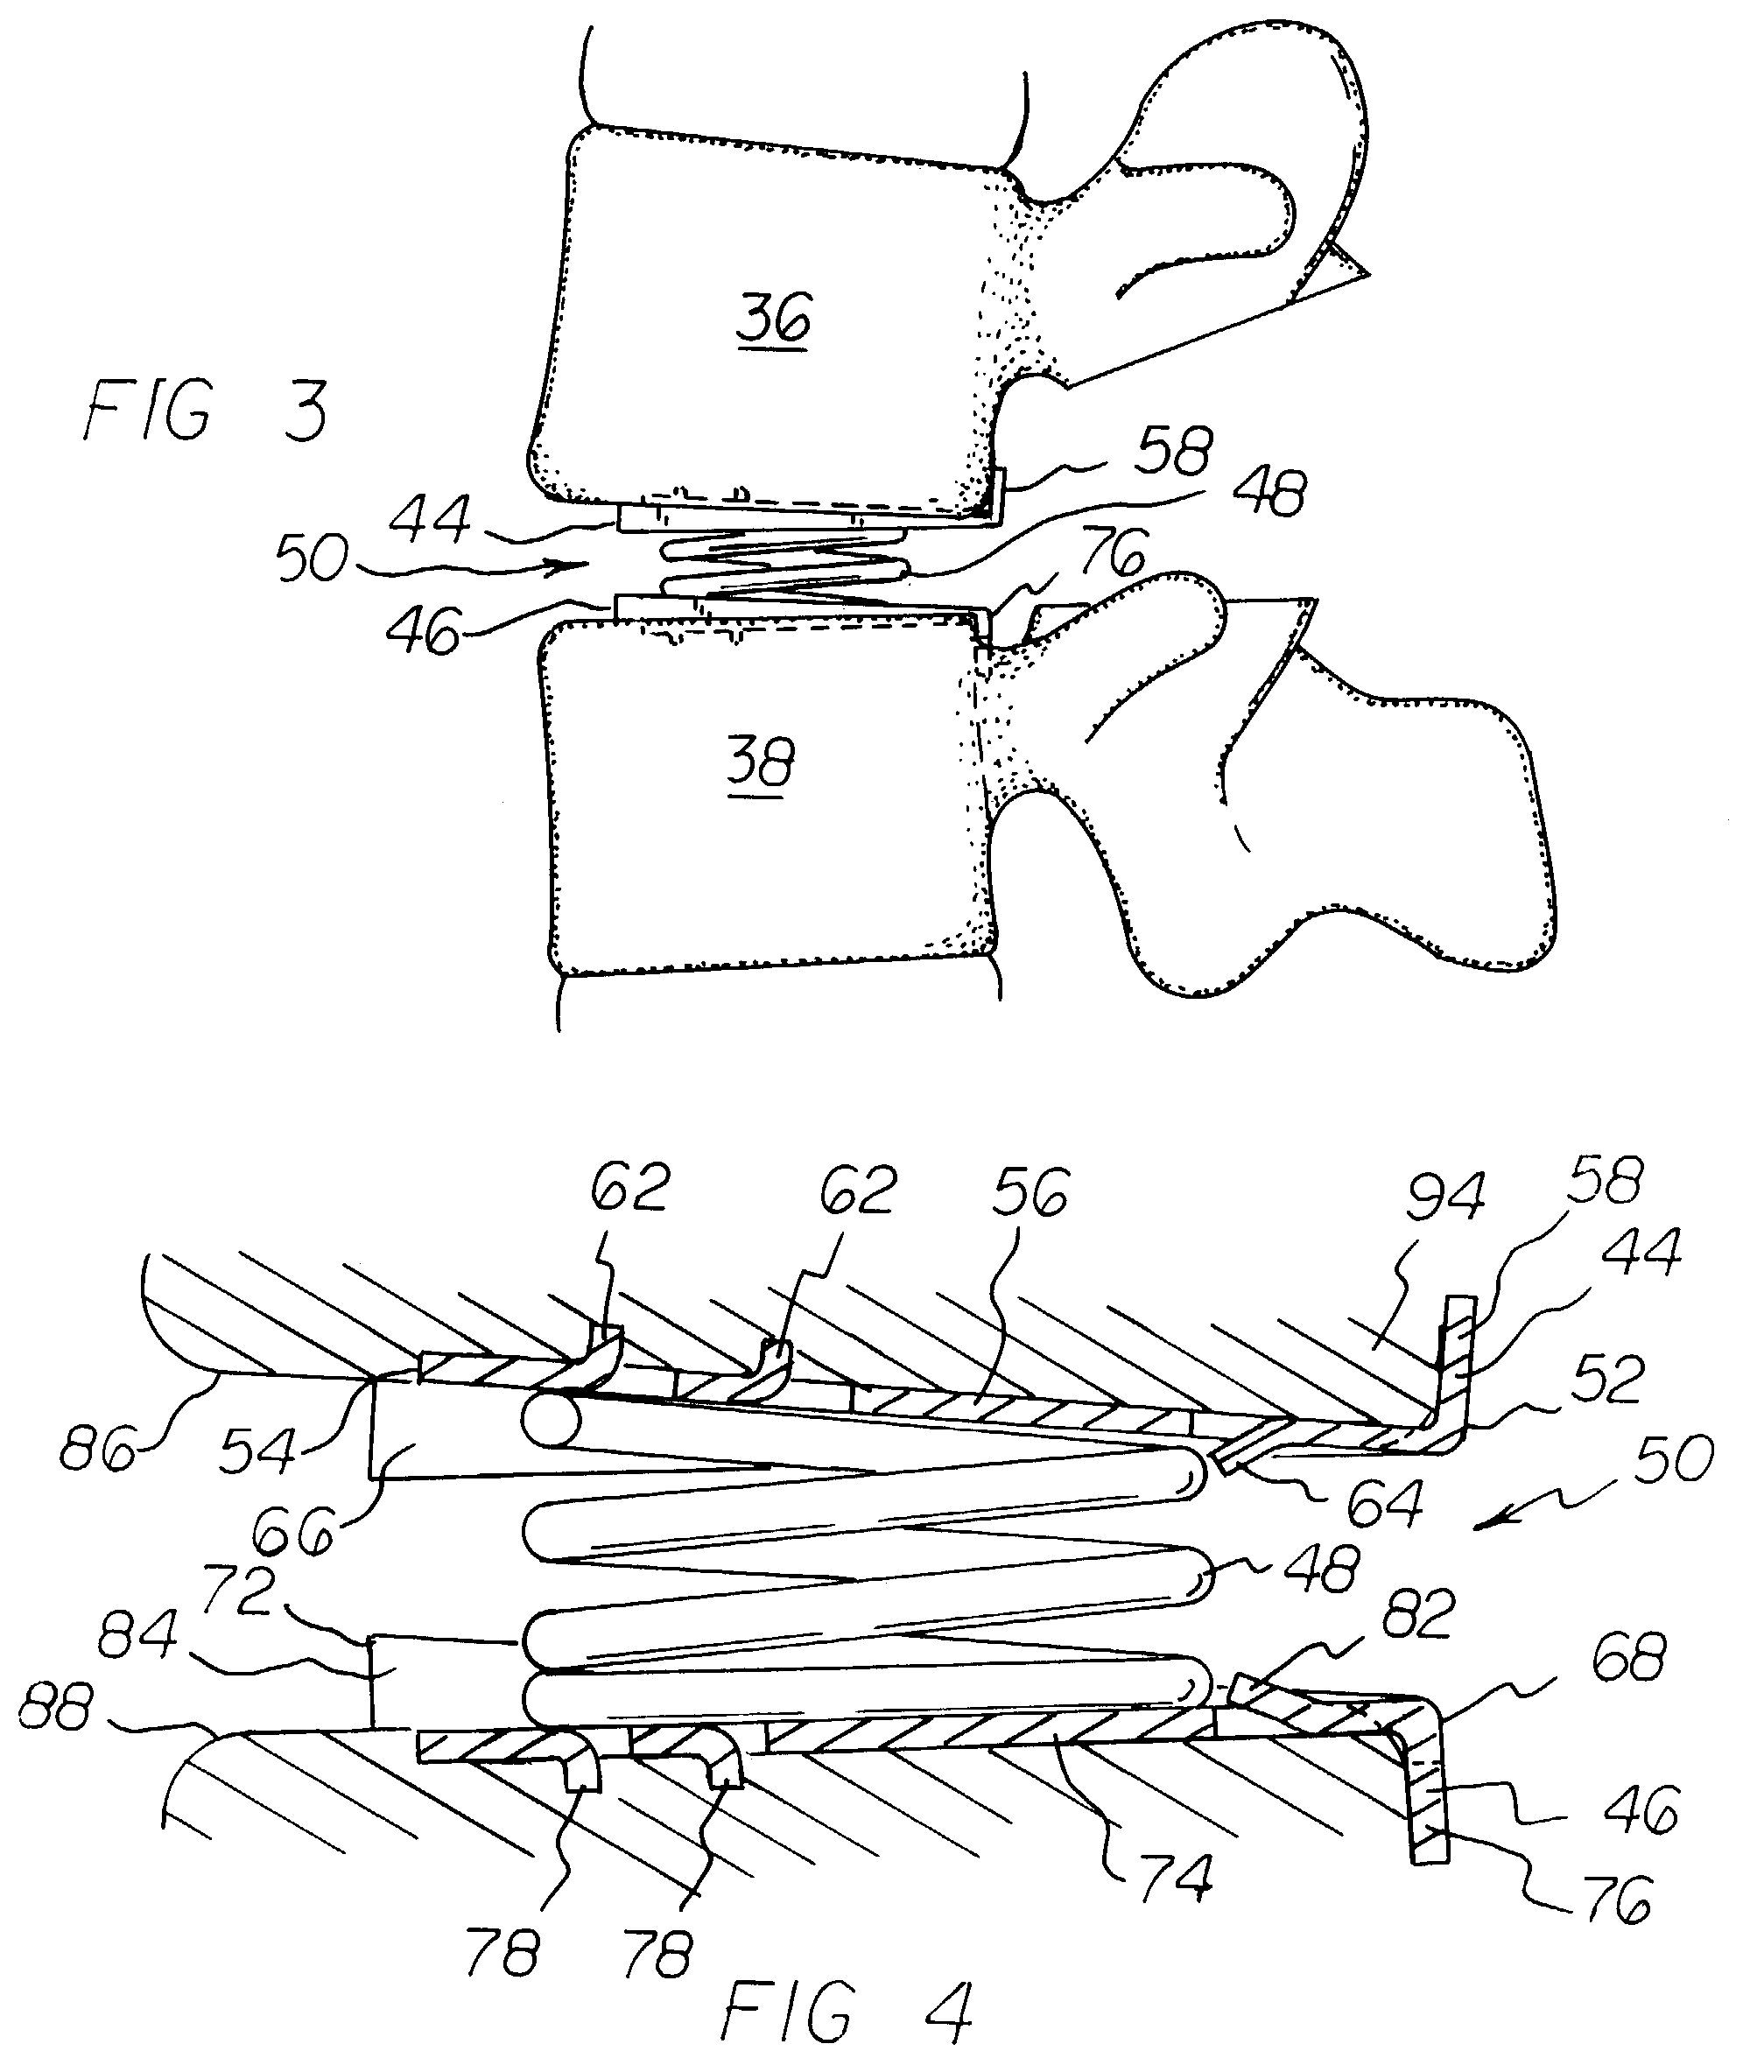 Vertebral implant with dampening matrix adapted for posterior insertion